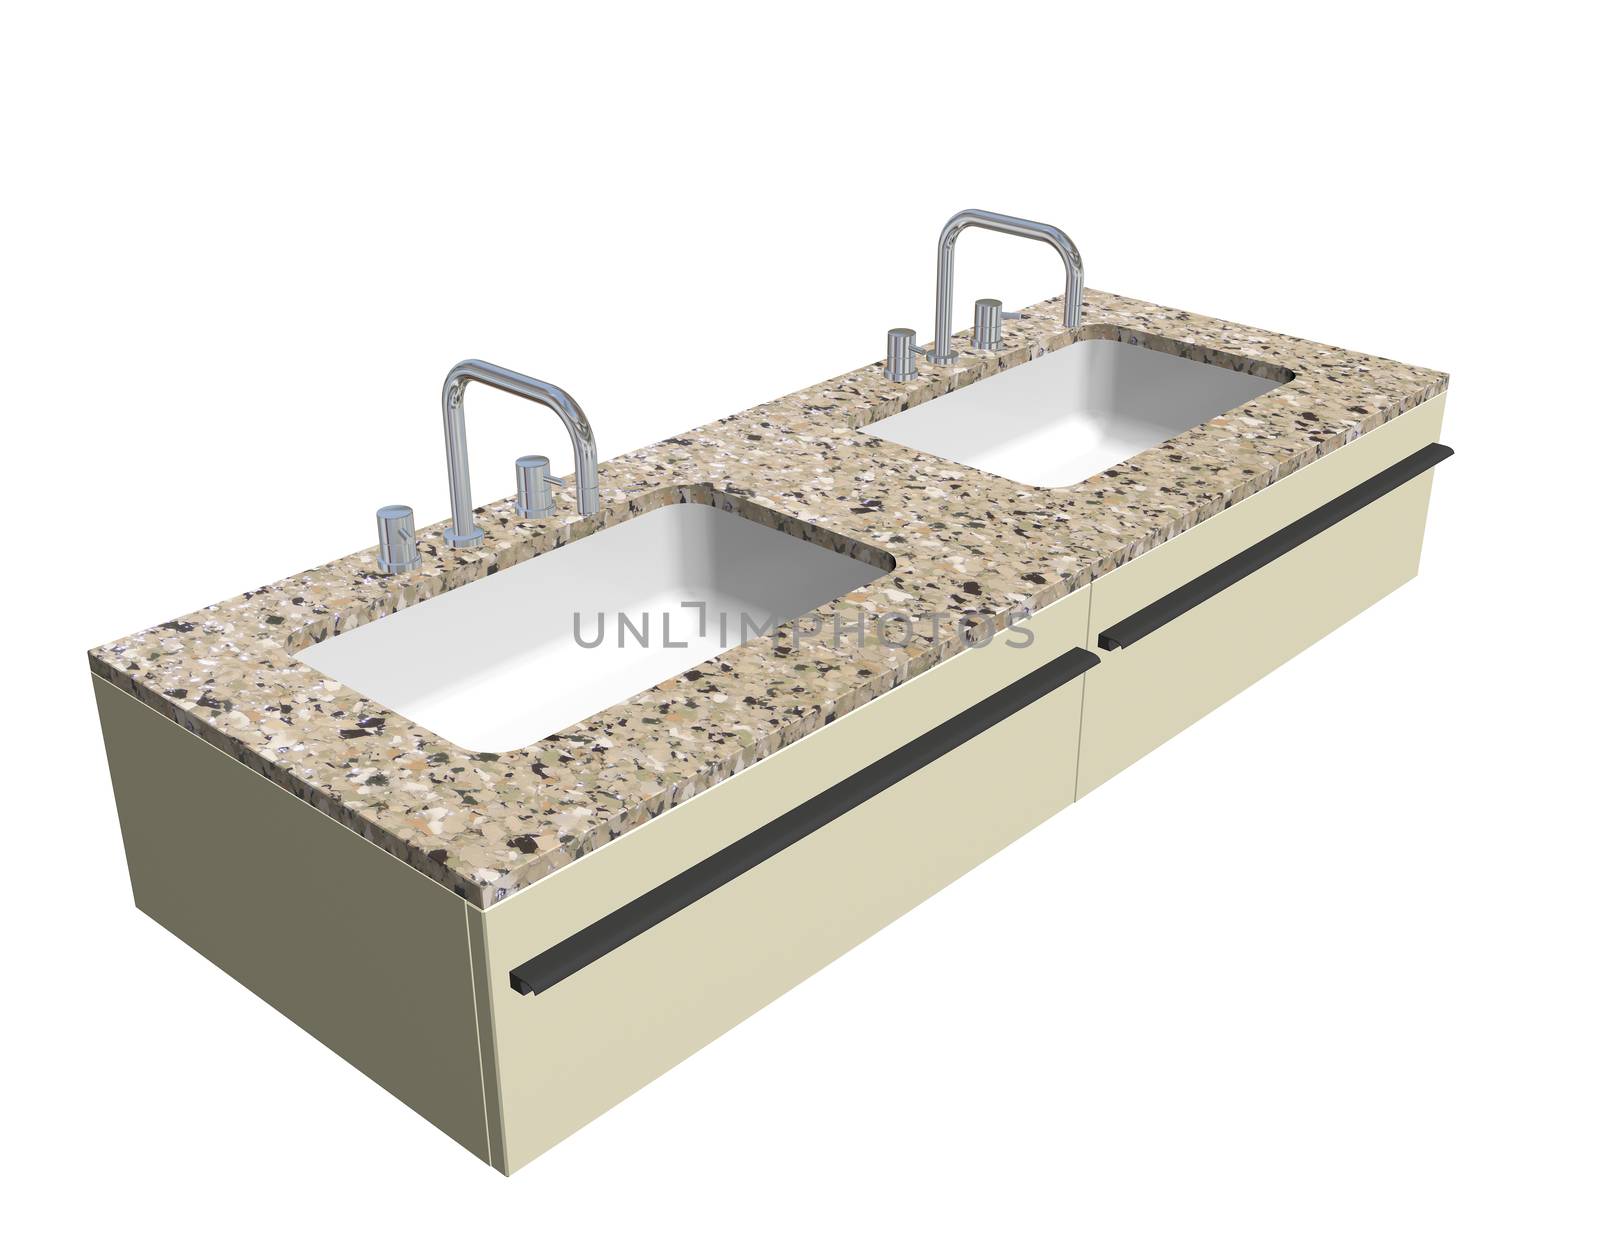 Modern washroom sink set with granite counter and chrome fixture by Morphart